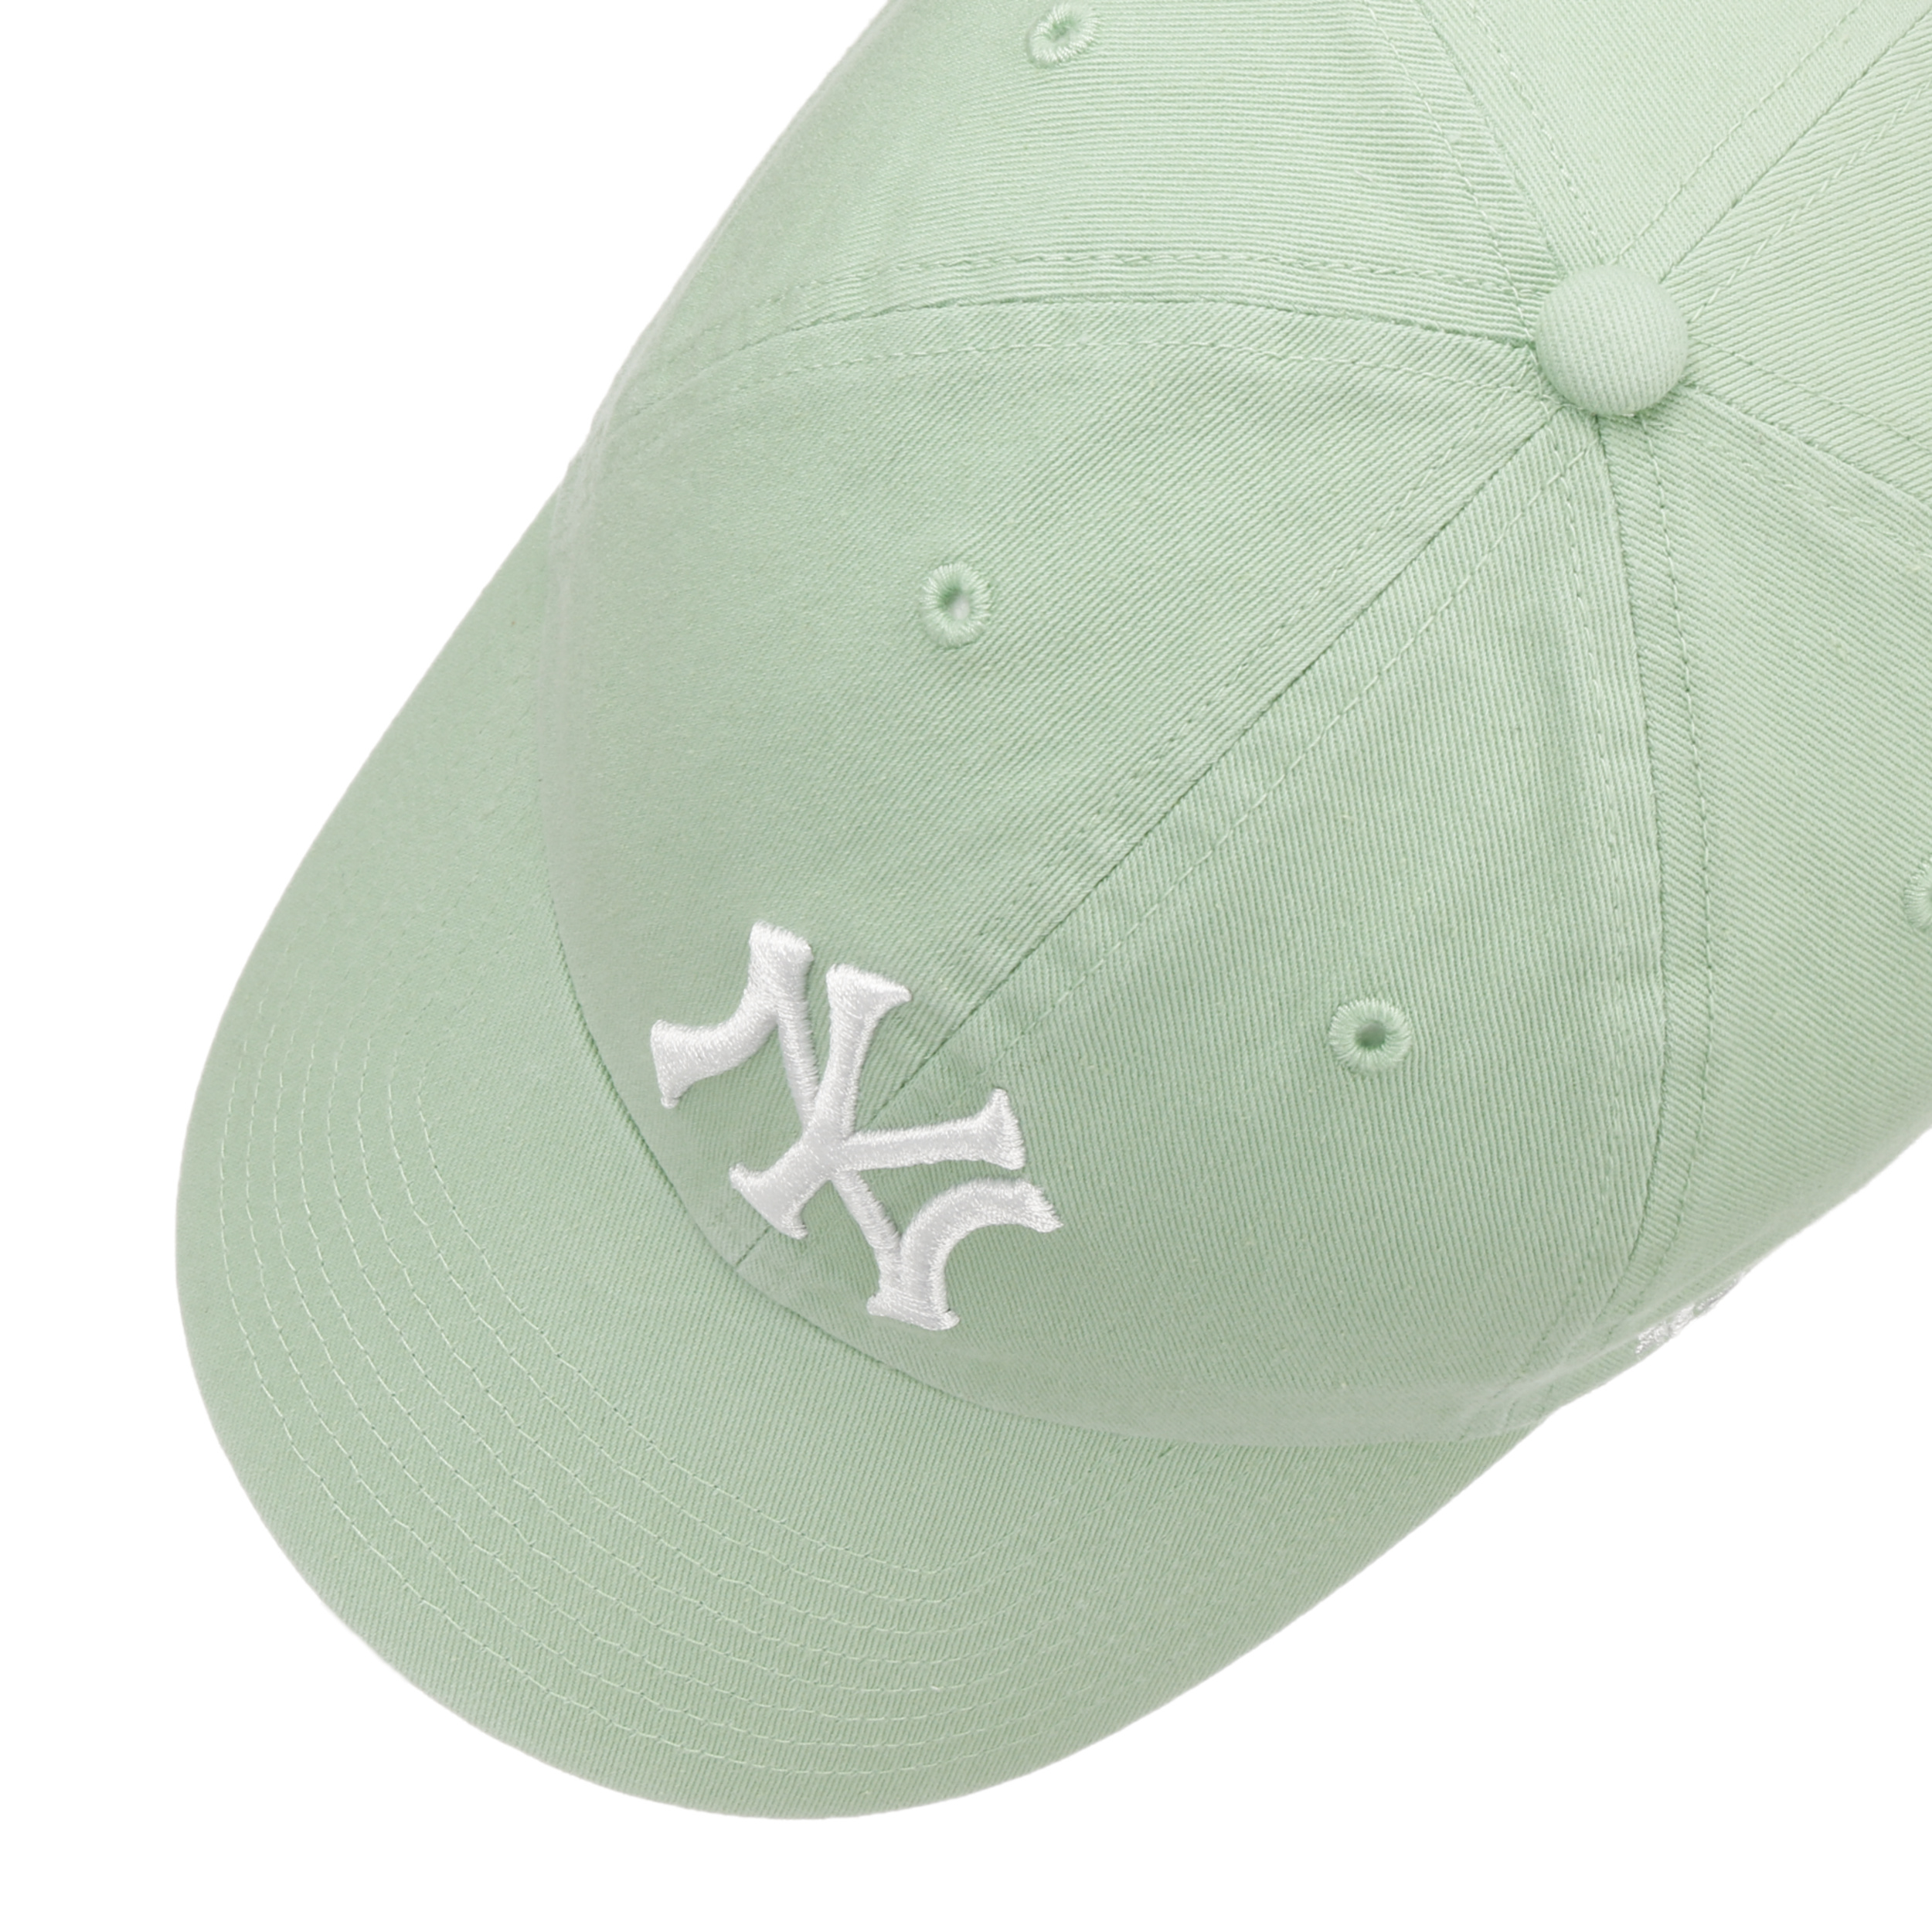 Luxury Designer Mint Green Baseball Cap Casquette Jumbo G Unisex  Embroidered Sun Hat In Green And Pink For Fashionable And Leisurely Style  From Jewelry_earrings, $16.01